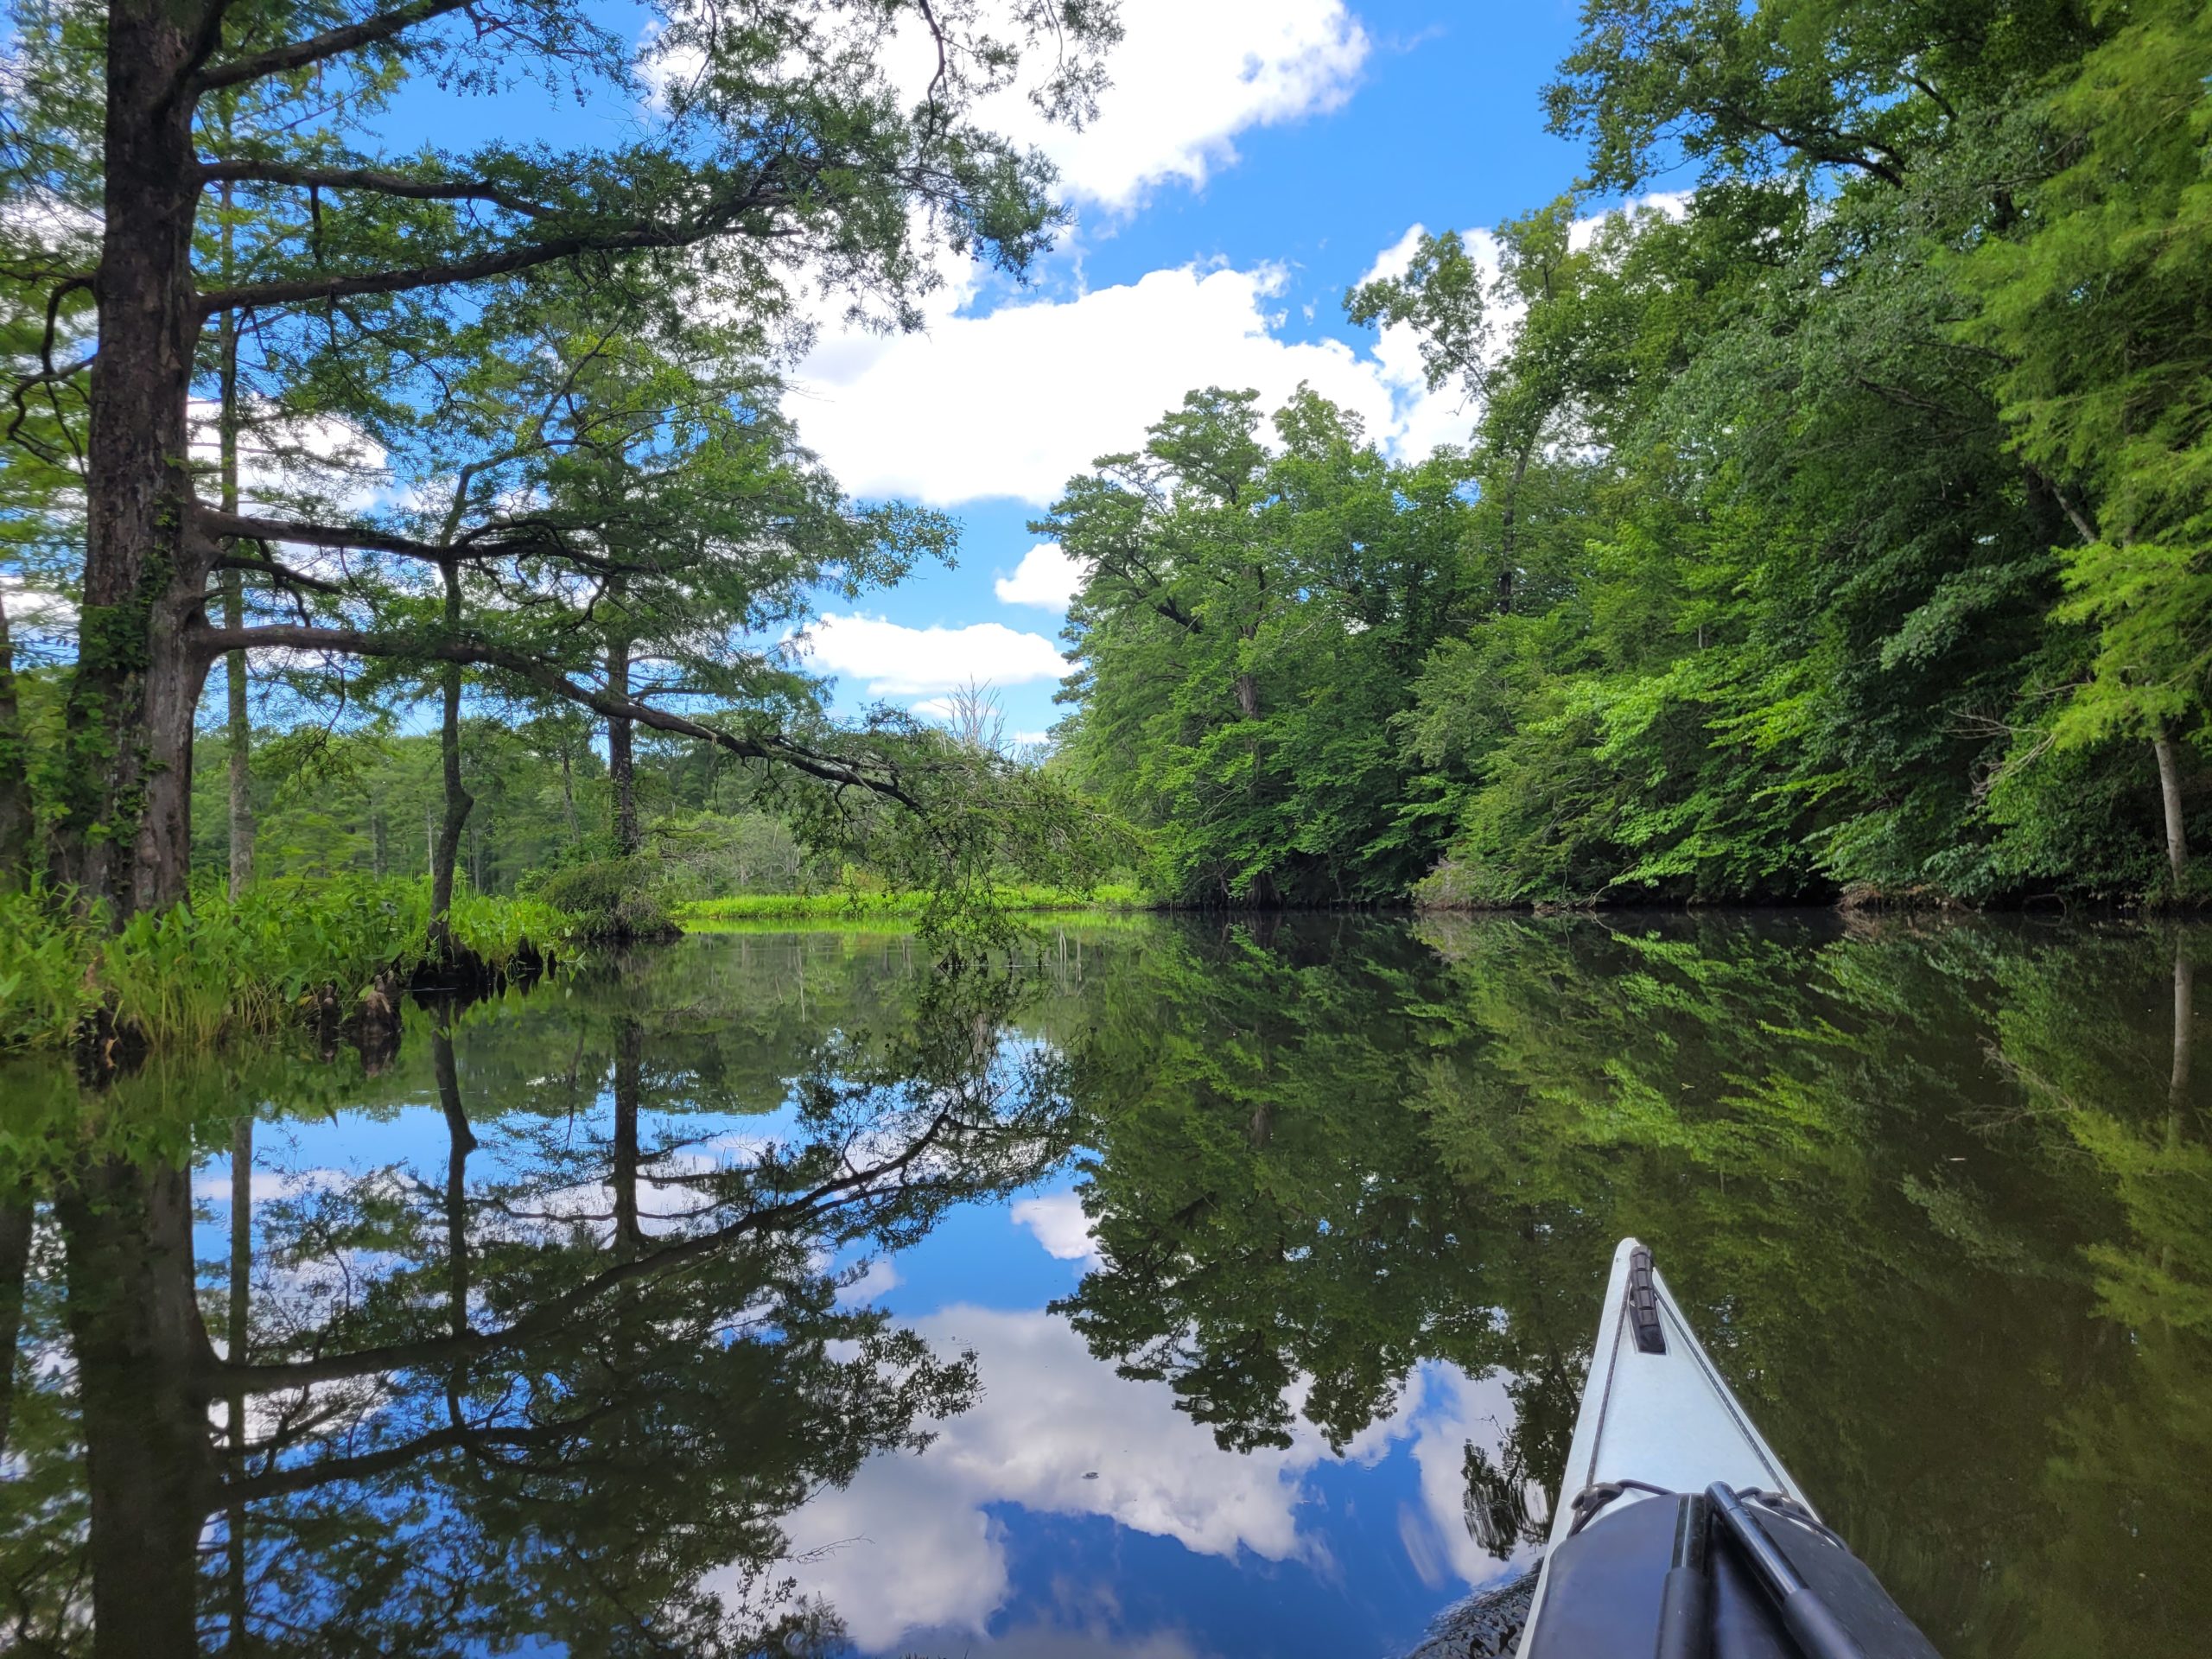 bald cypress trees reflect on still creek waters with a kayak bow in the foreground